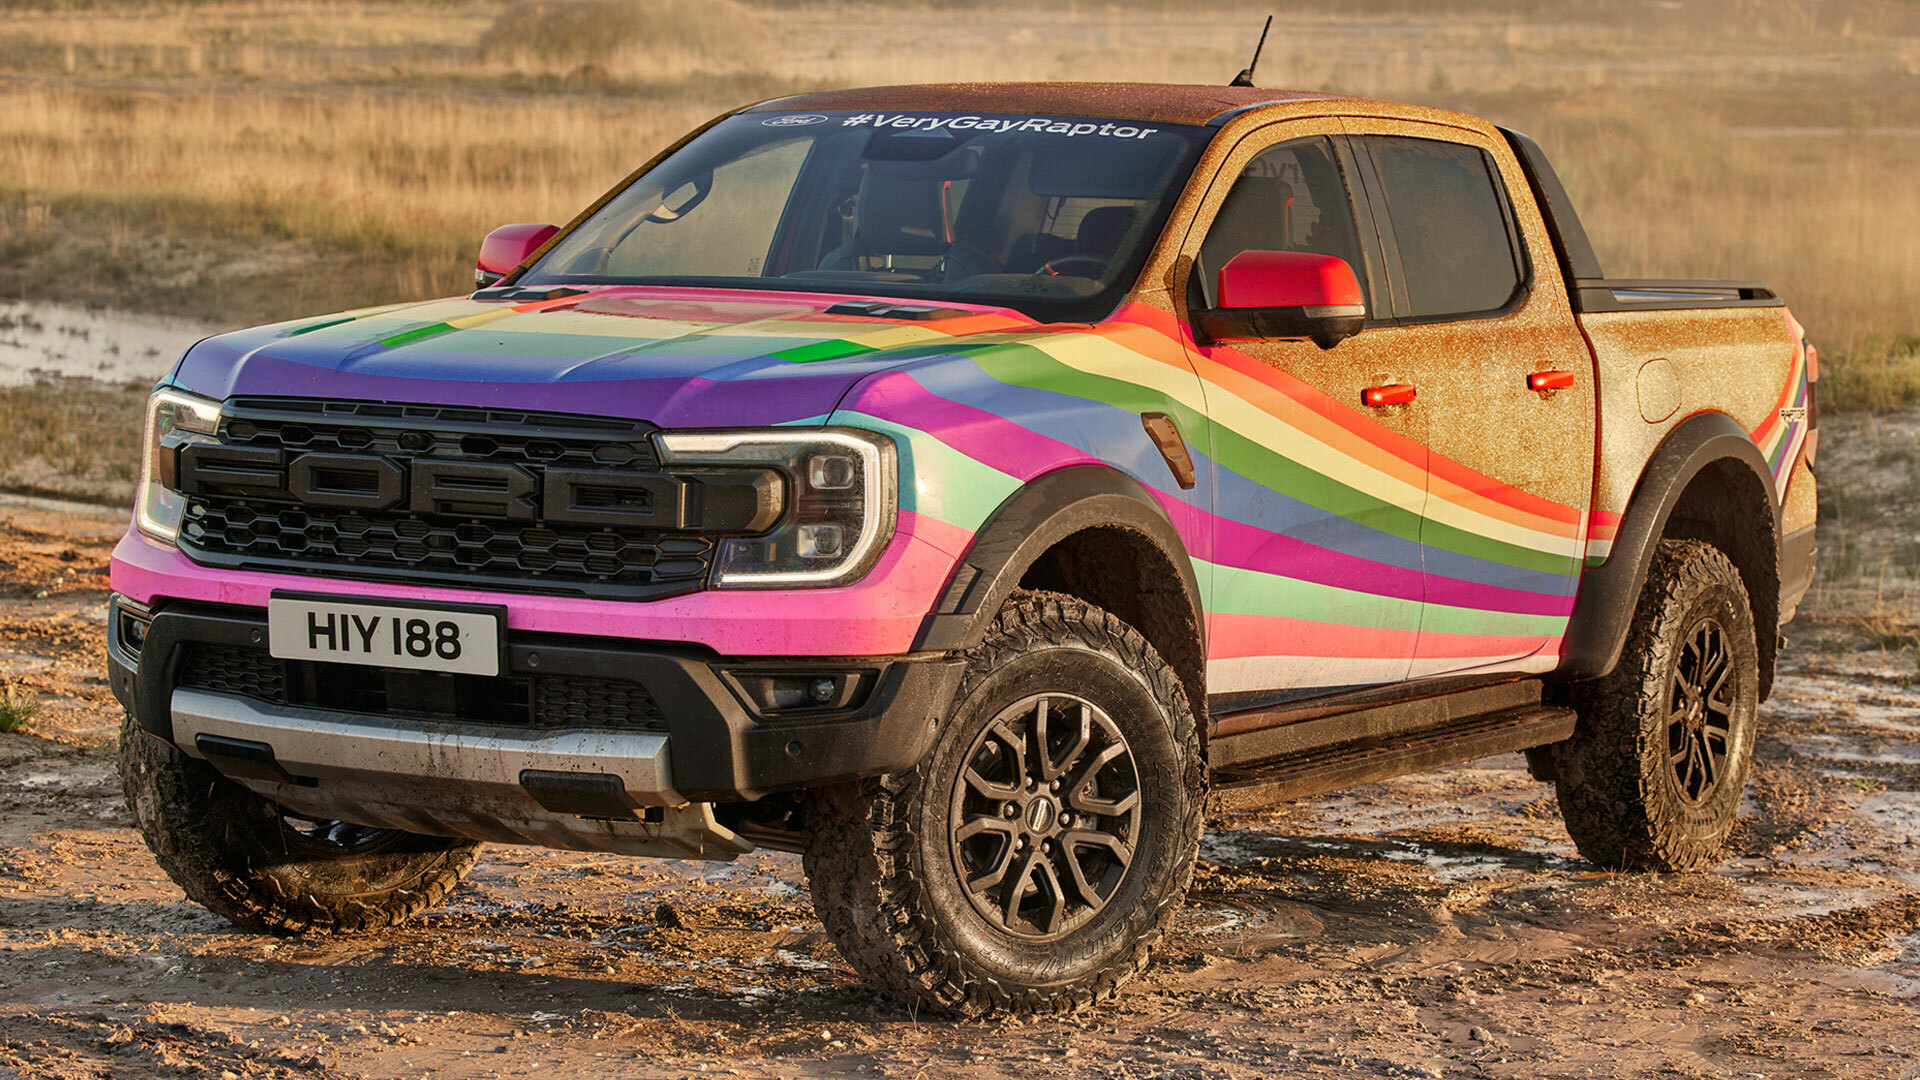 Why Society Has Deemed A Crappy Truck Cooler Than A Crappy Car